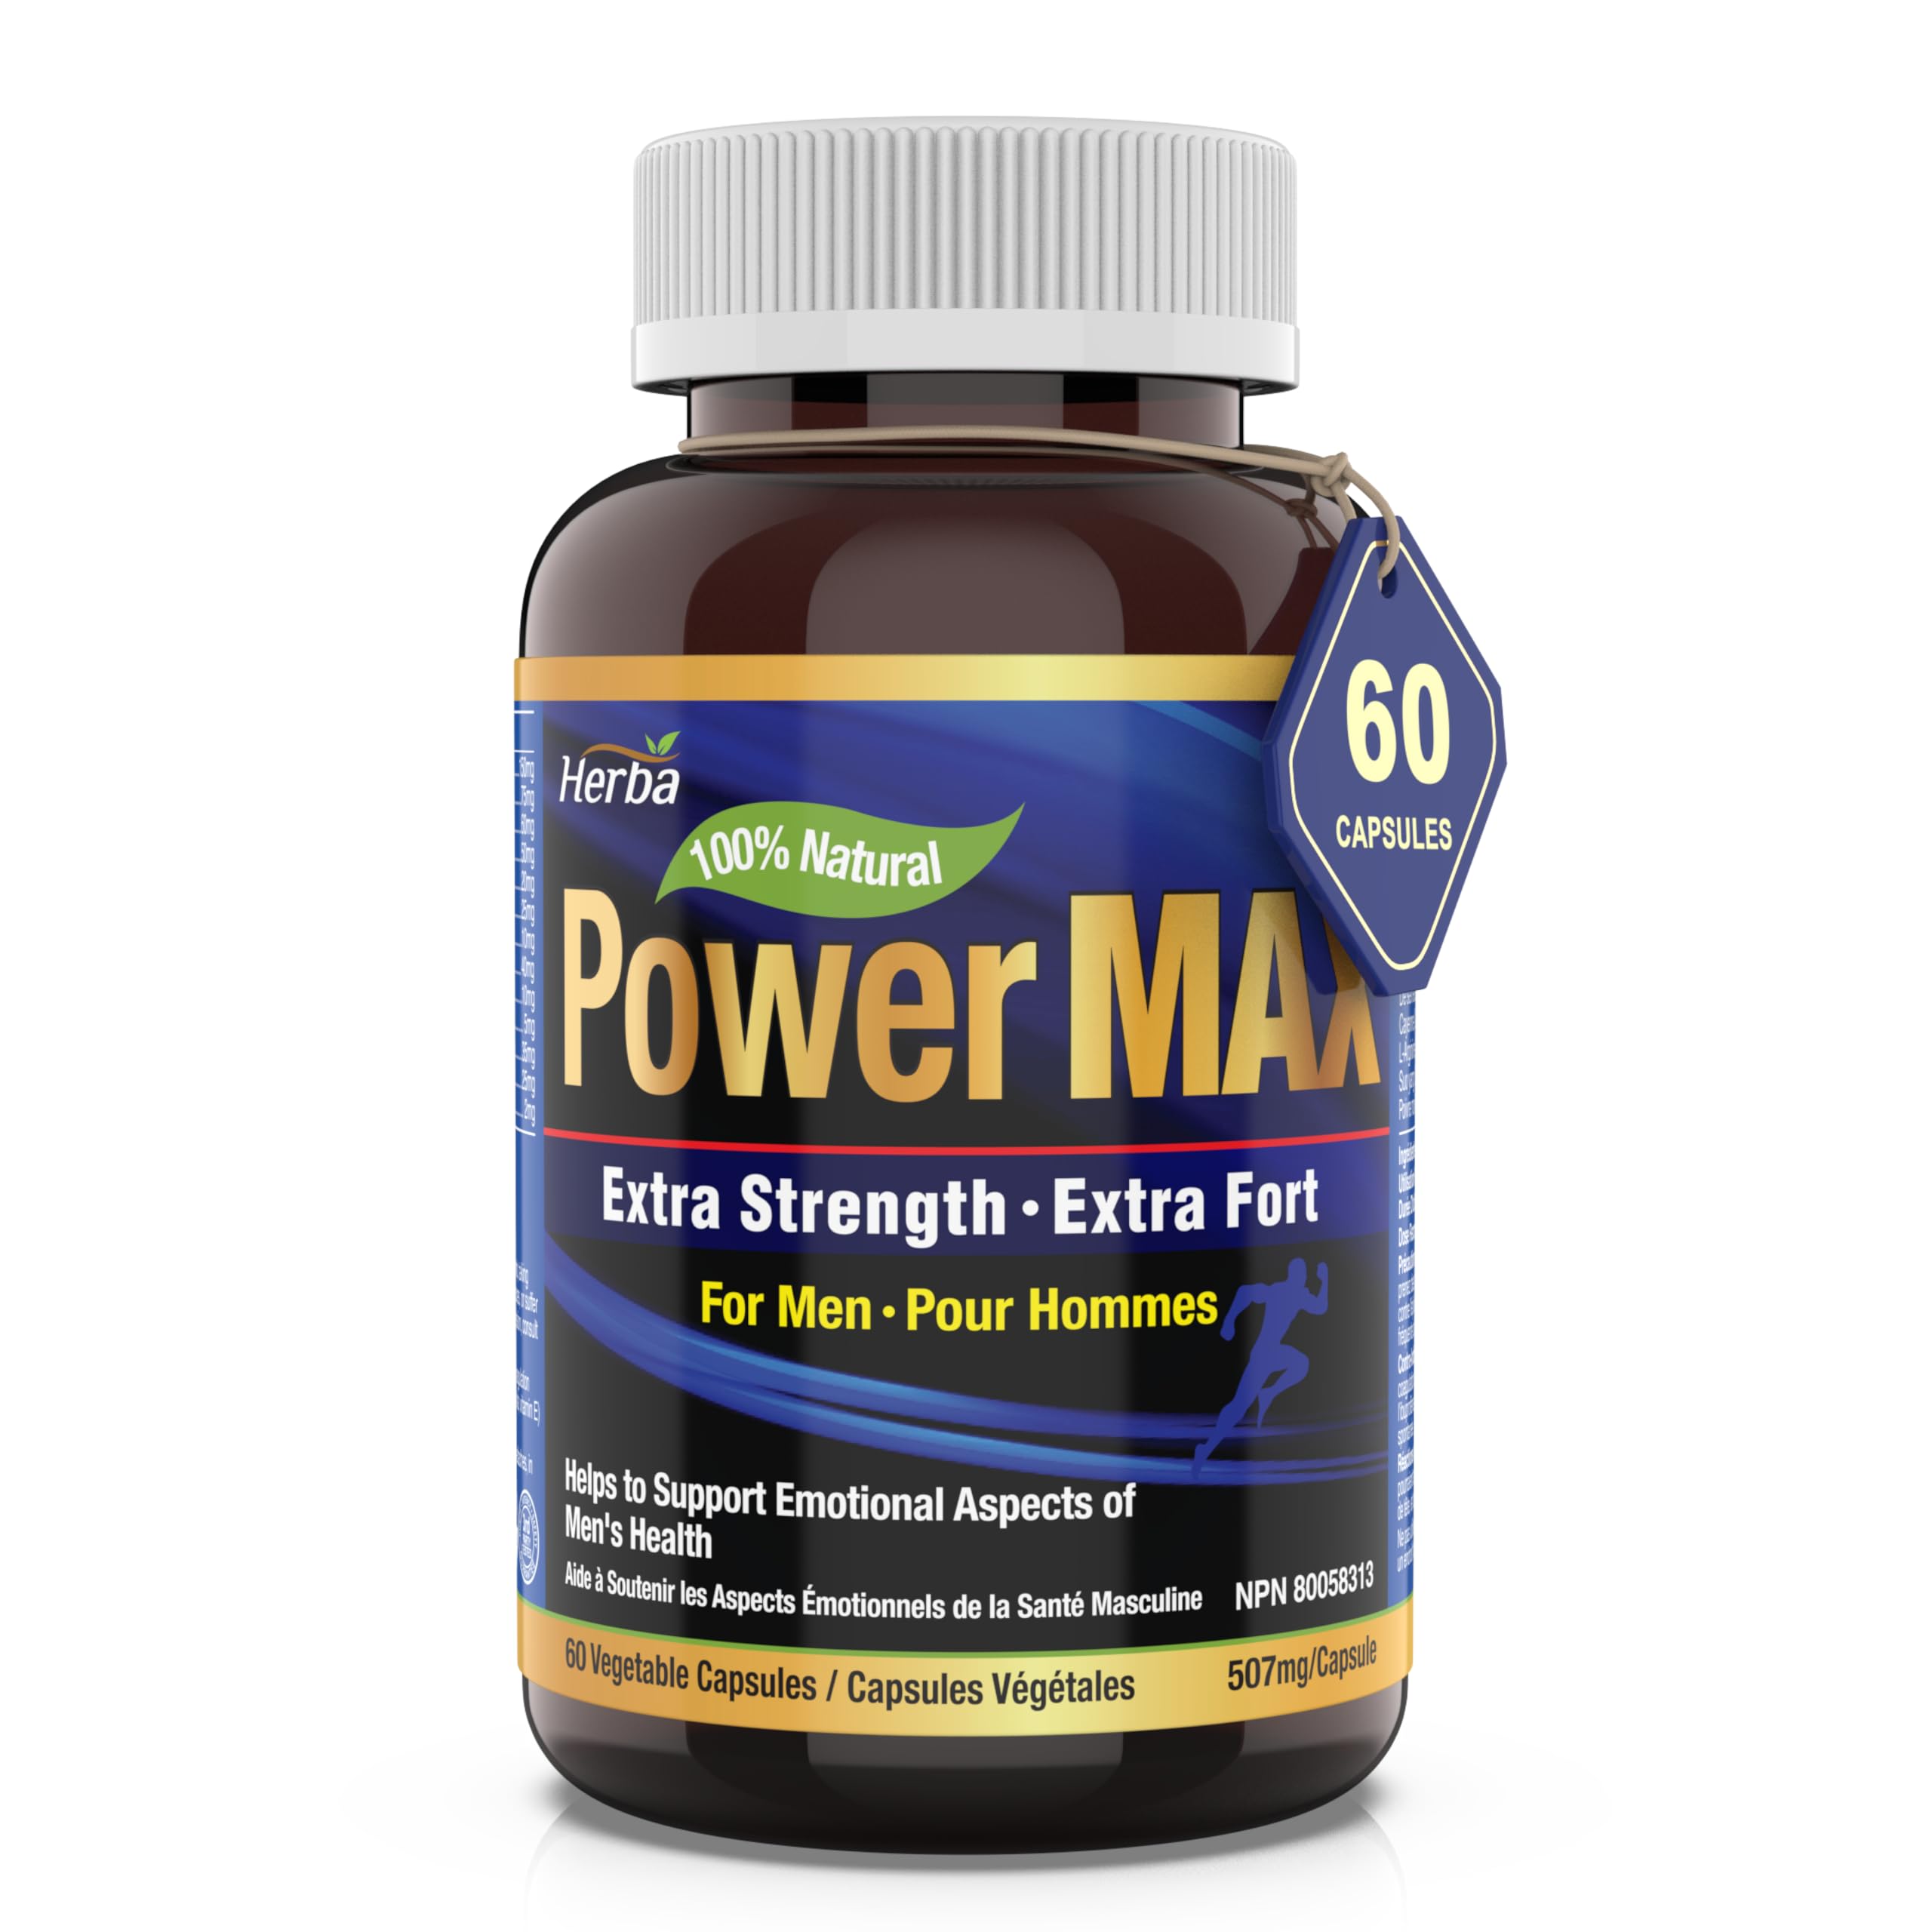 buy testosterone booster made in Canada